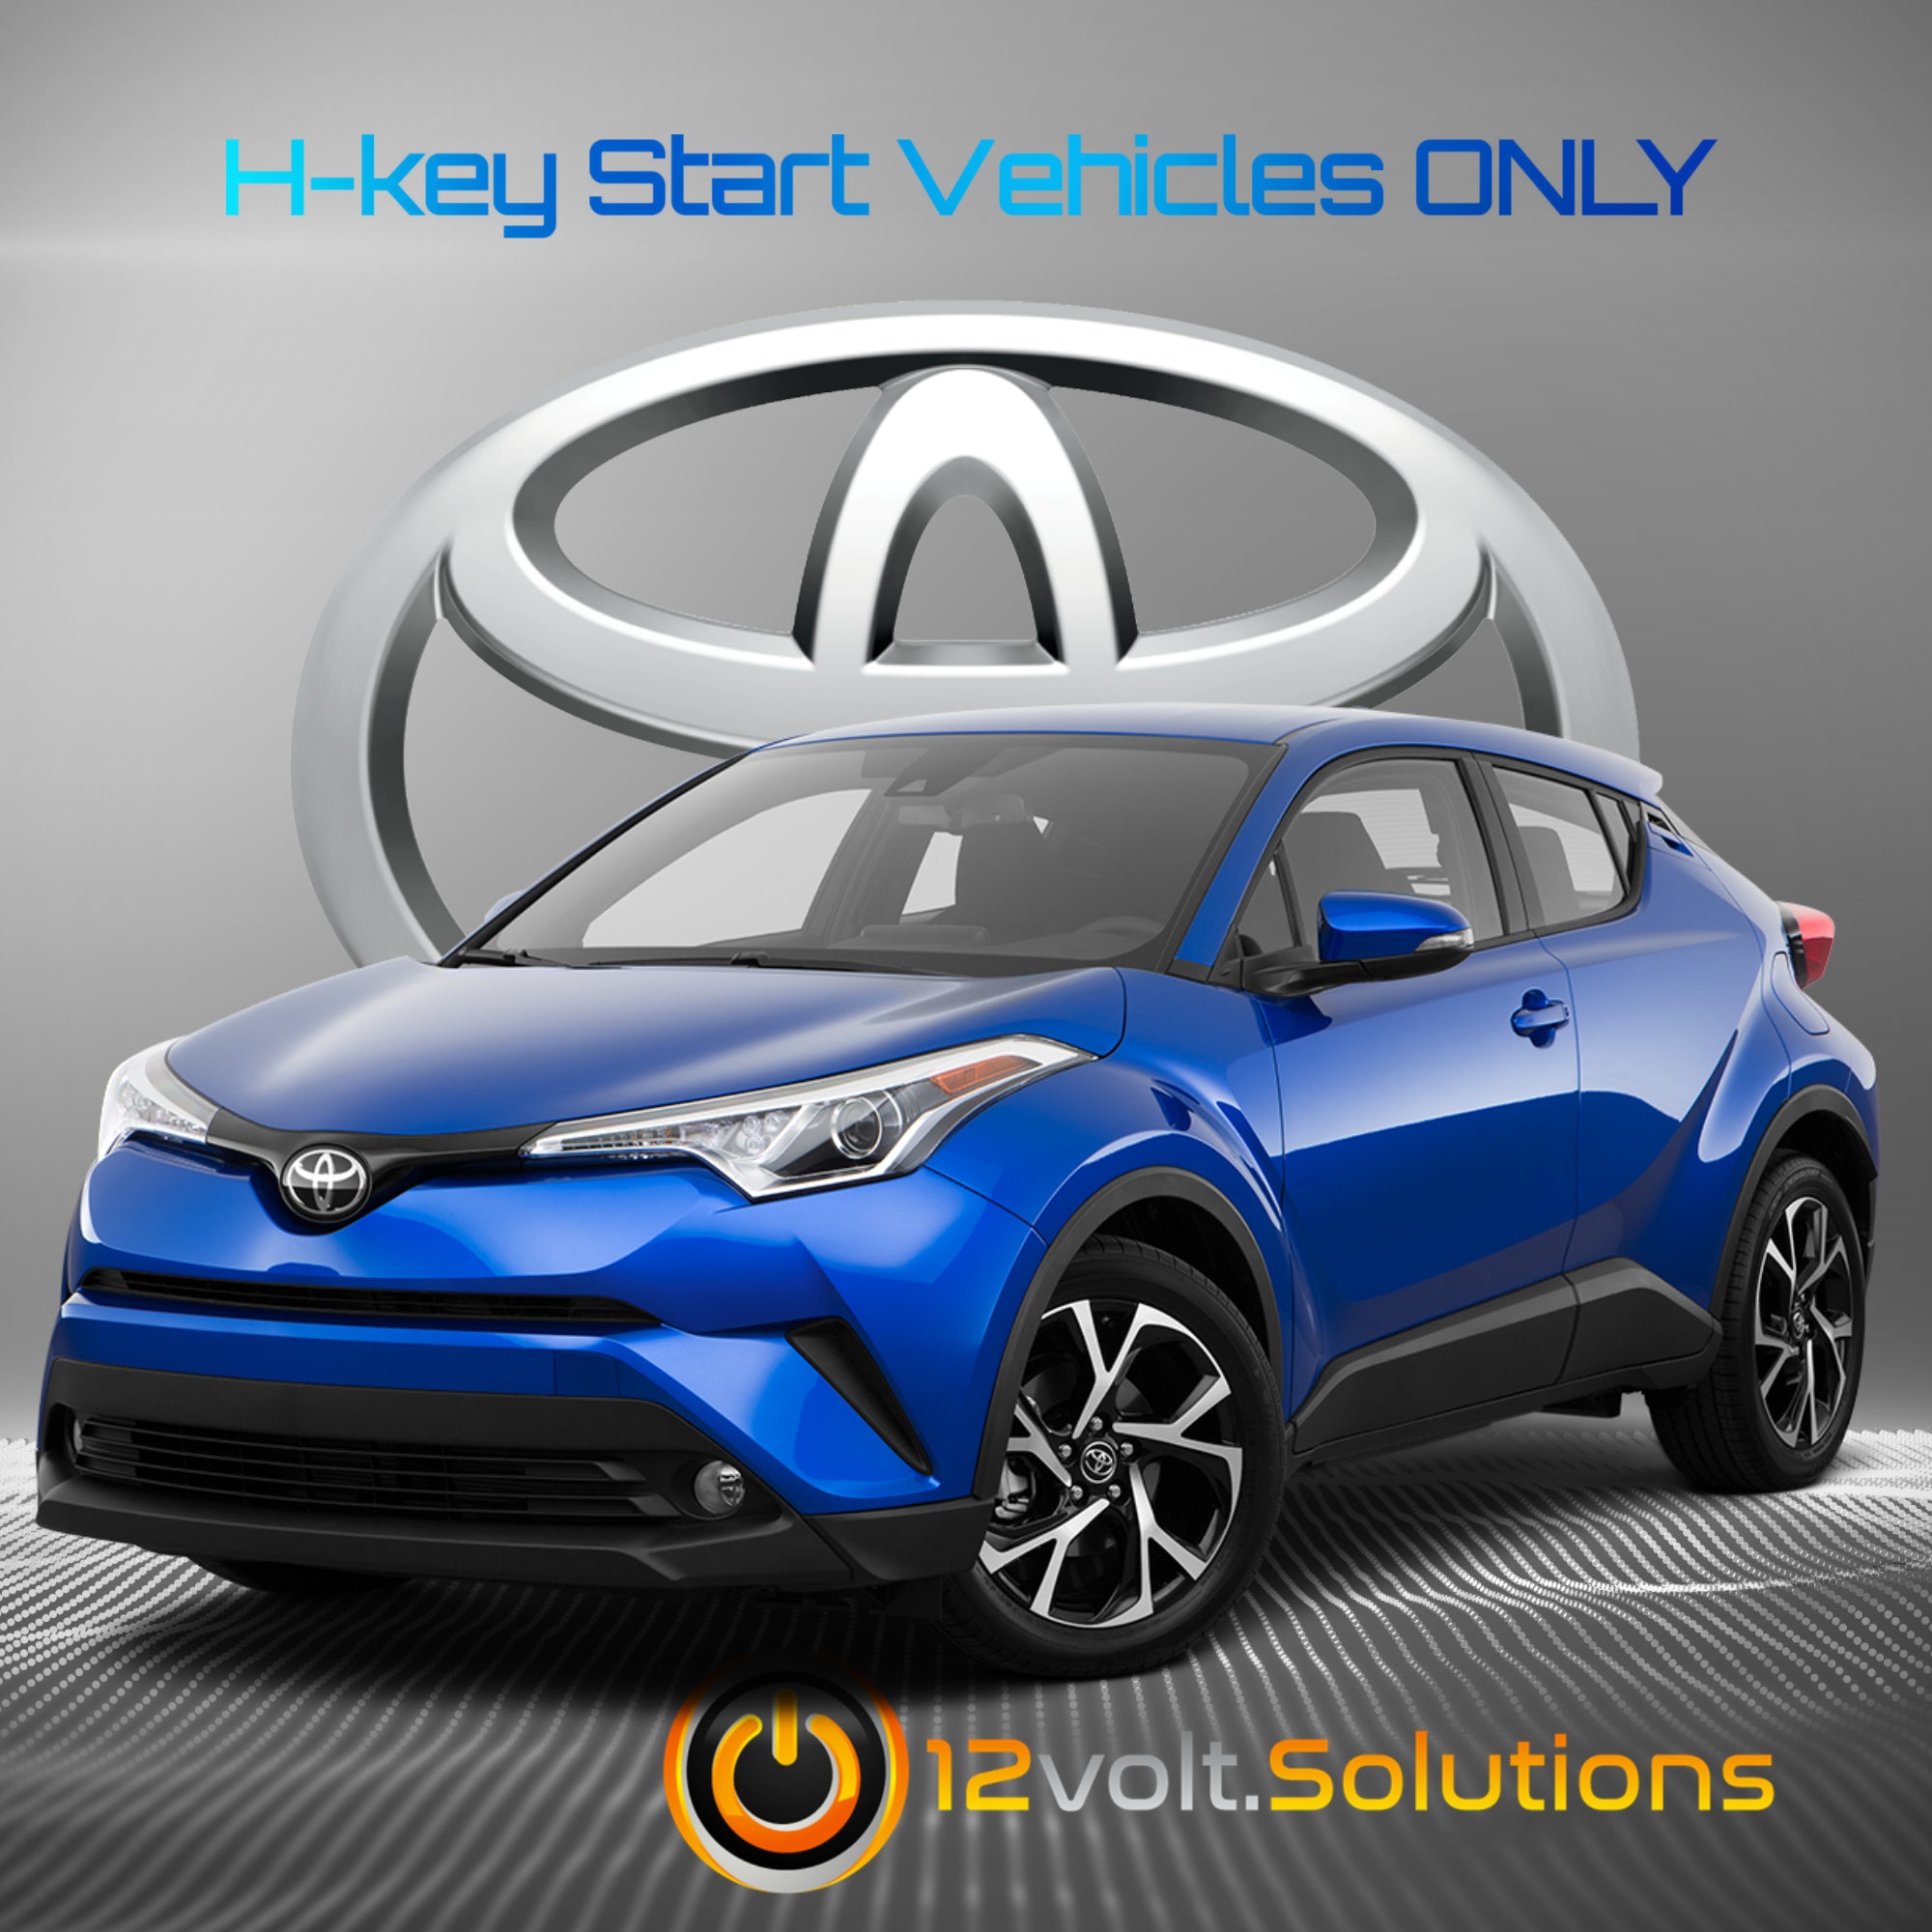 2018-2019 Toyota C-HR Plug and Play Remote Start Kit (H-Key)-12Volt.Solutions